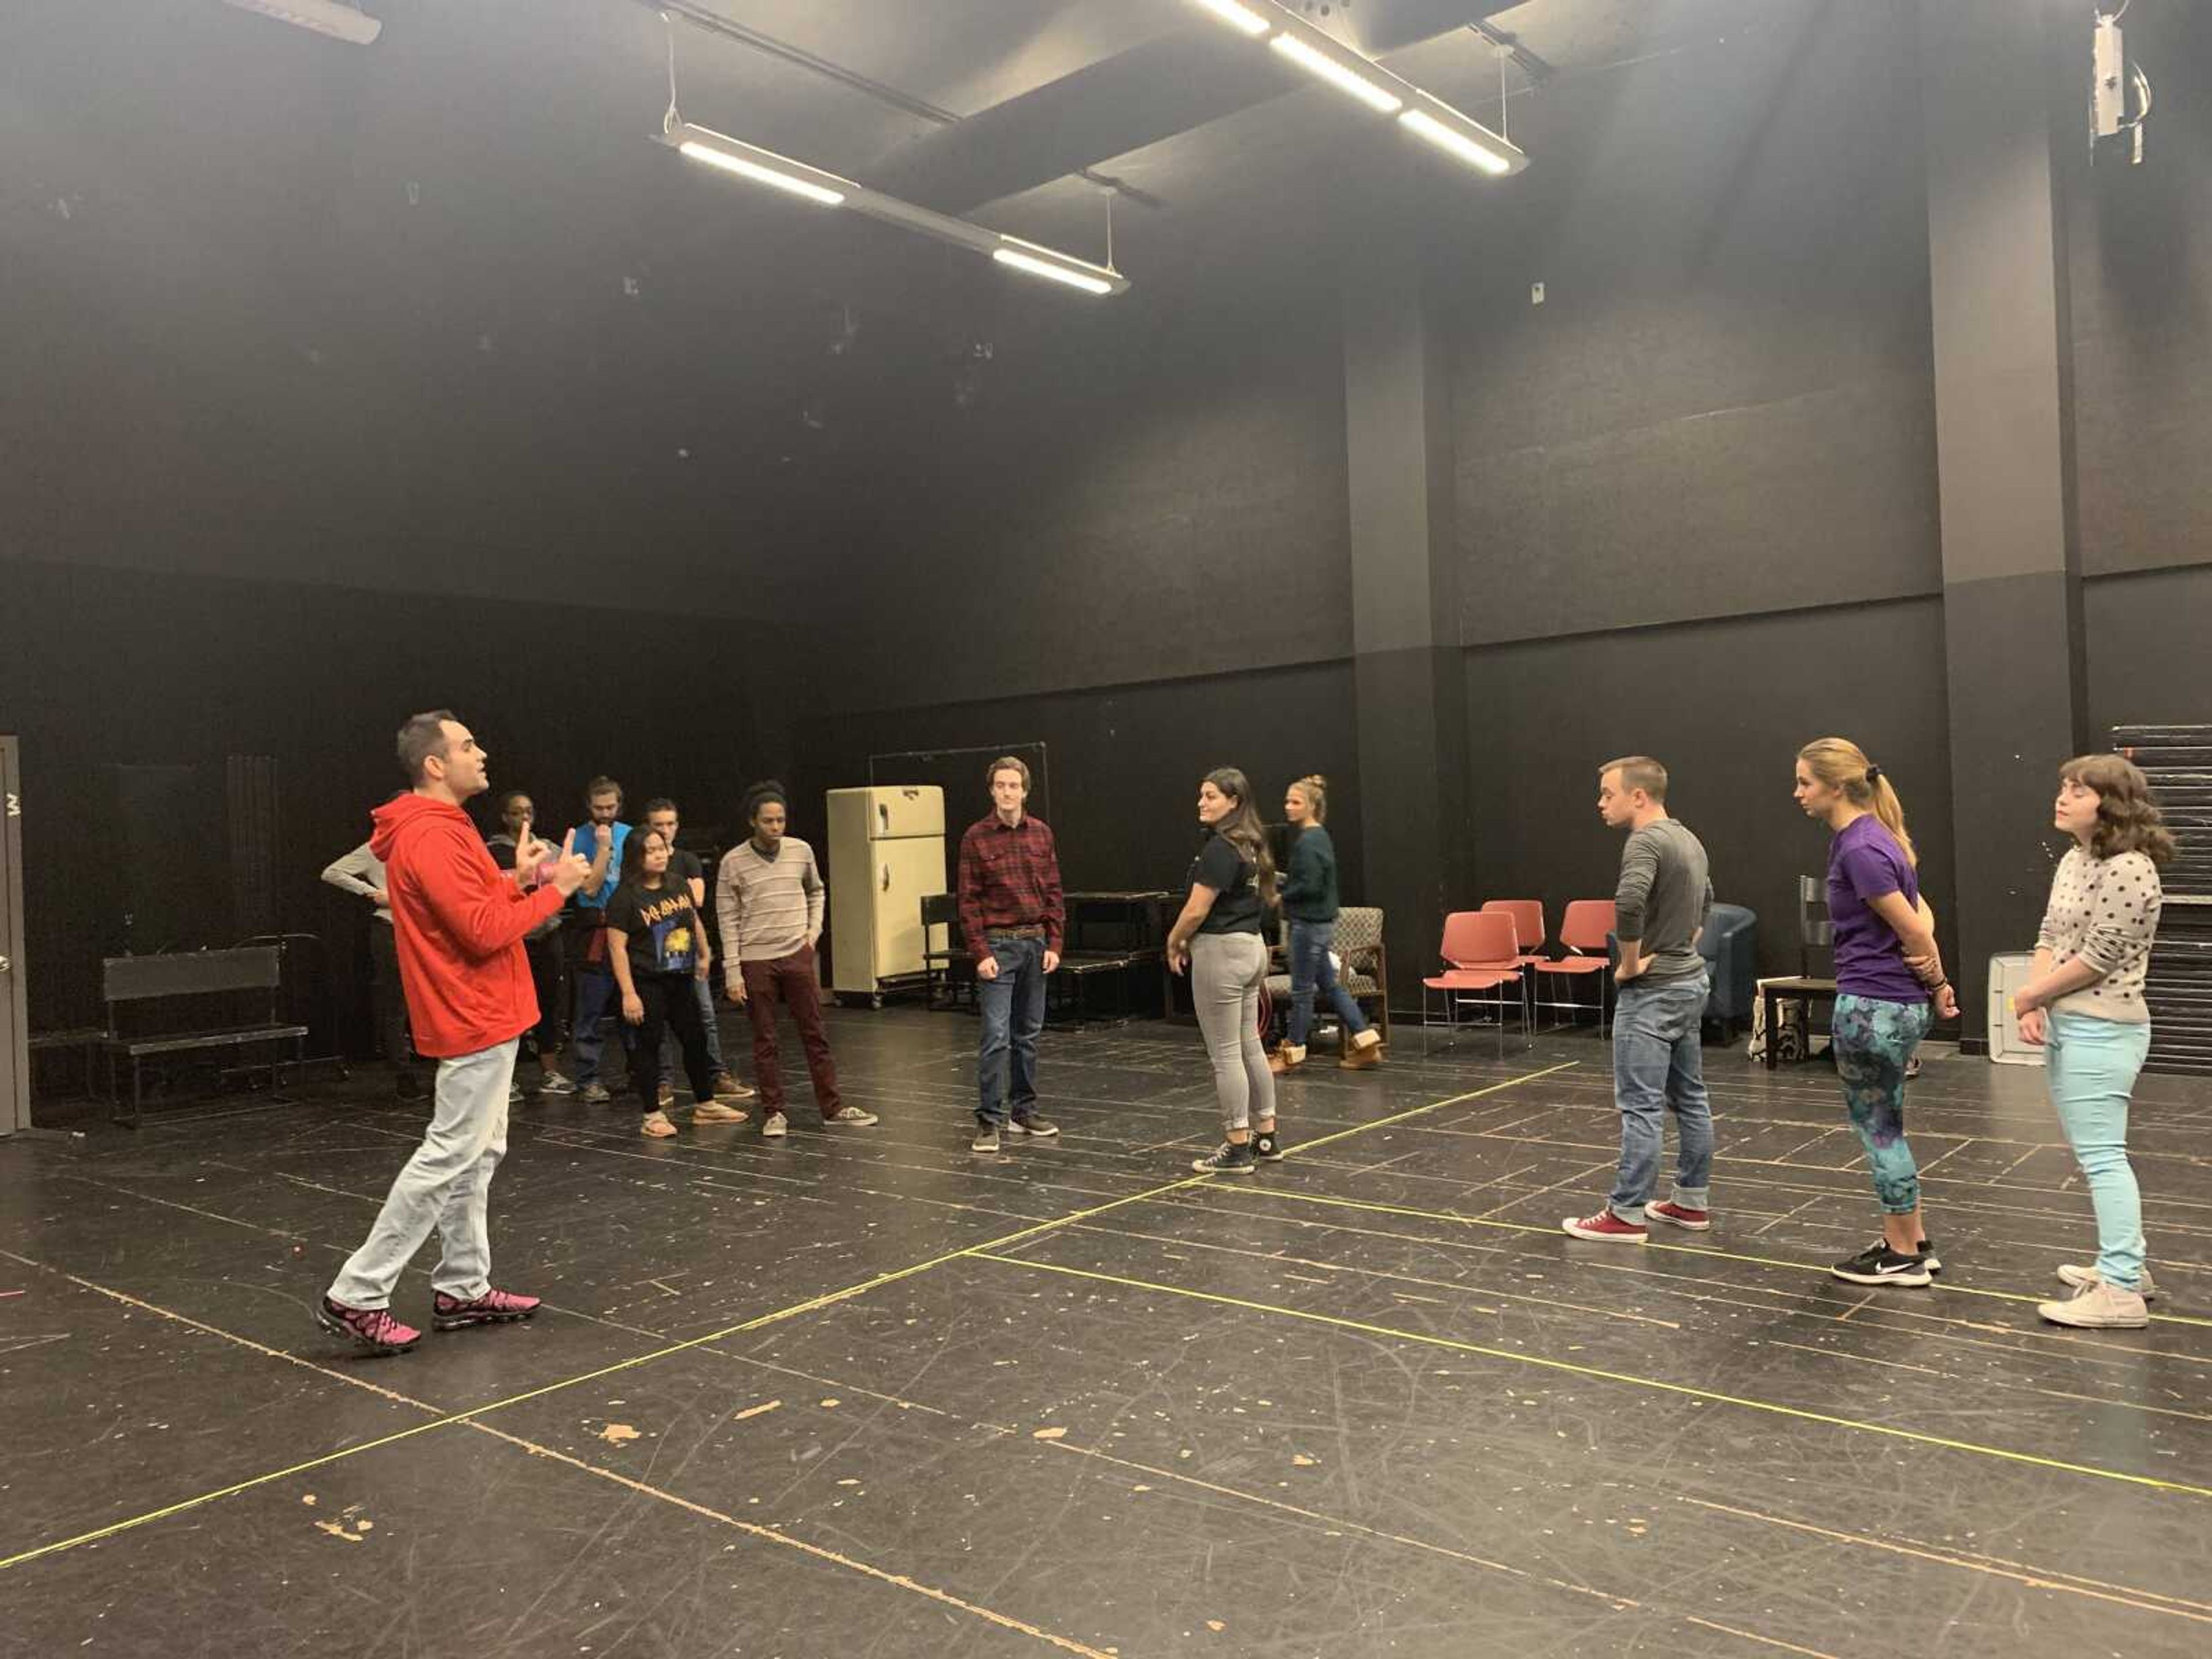 Nick Cutelli teaches an improv activity in the Master Class at River Campus